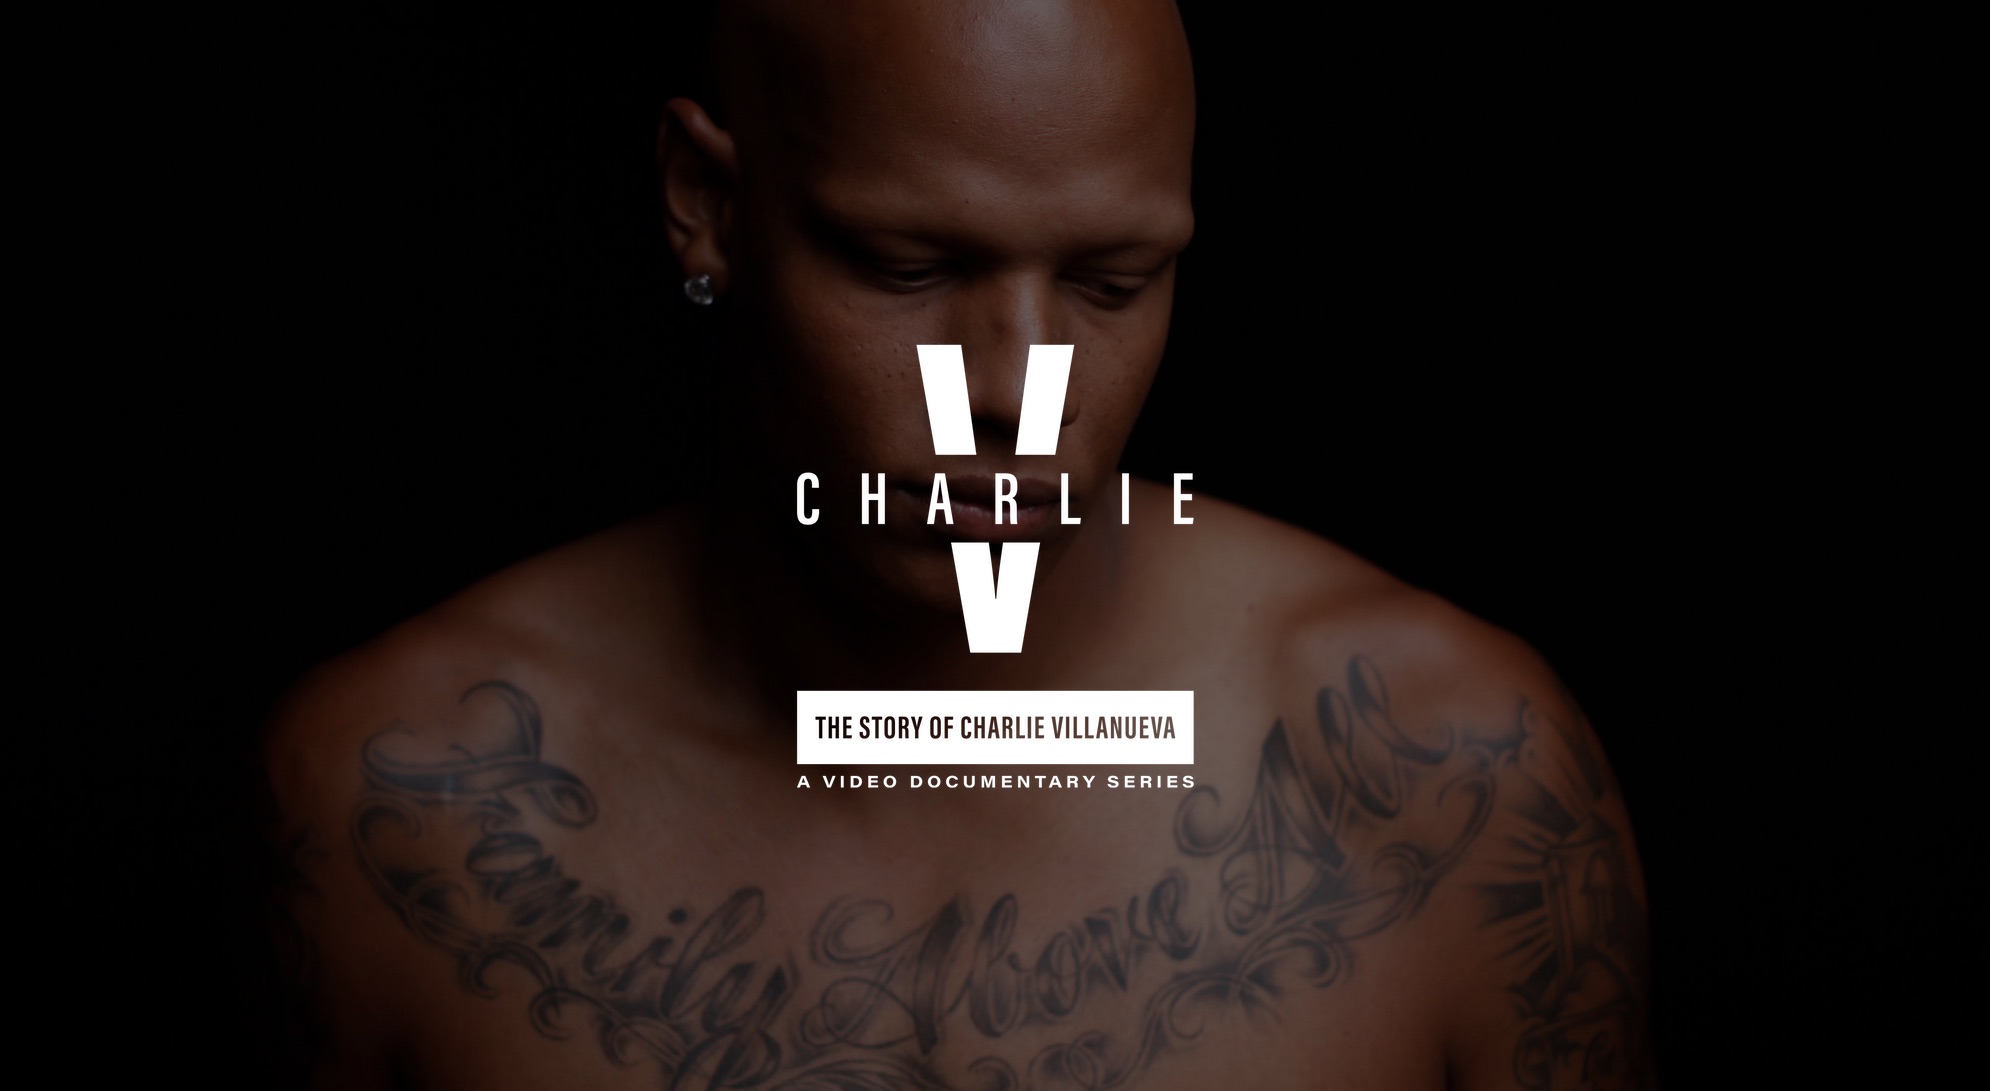 White Charlie V The Story of Charlie Villanueva A Video Documentary Series Logo with background of bald African American male looking down sporting a tattoo across his chest that reads "Family Above All". He also has an earring on his right ear